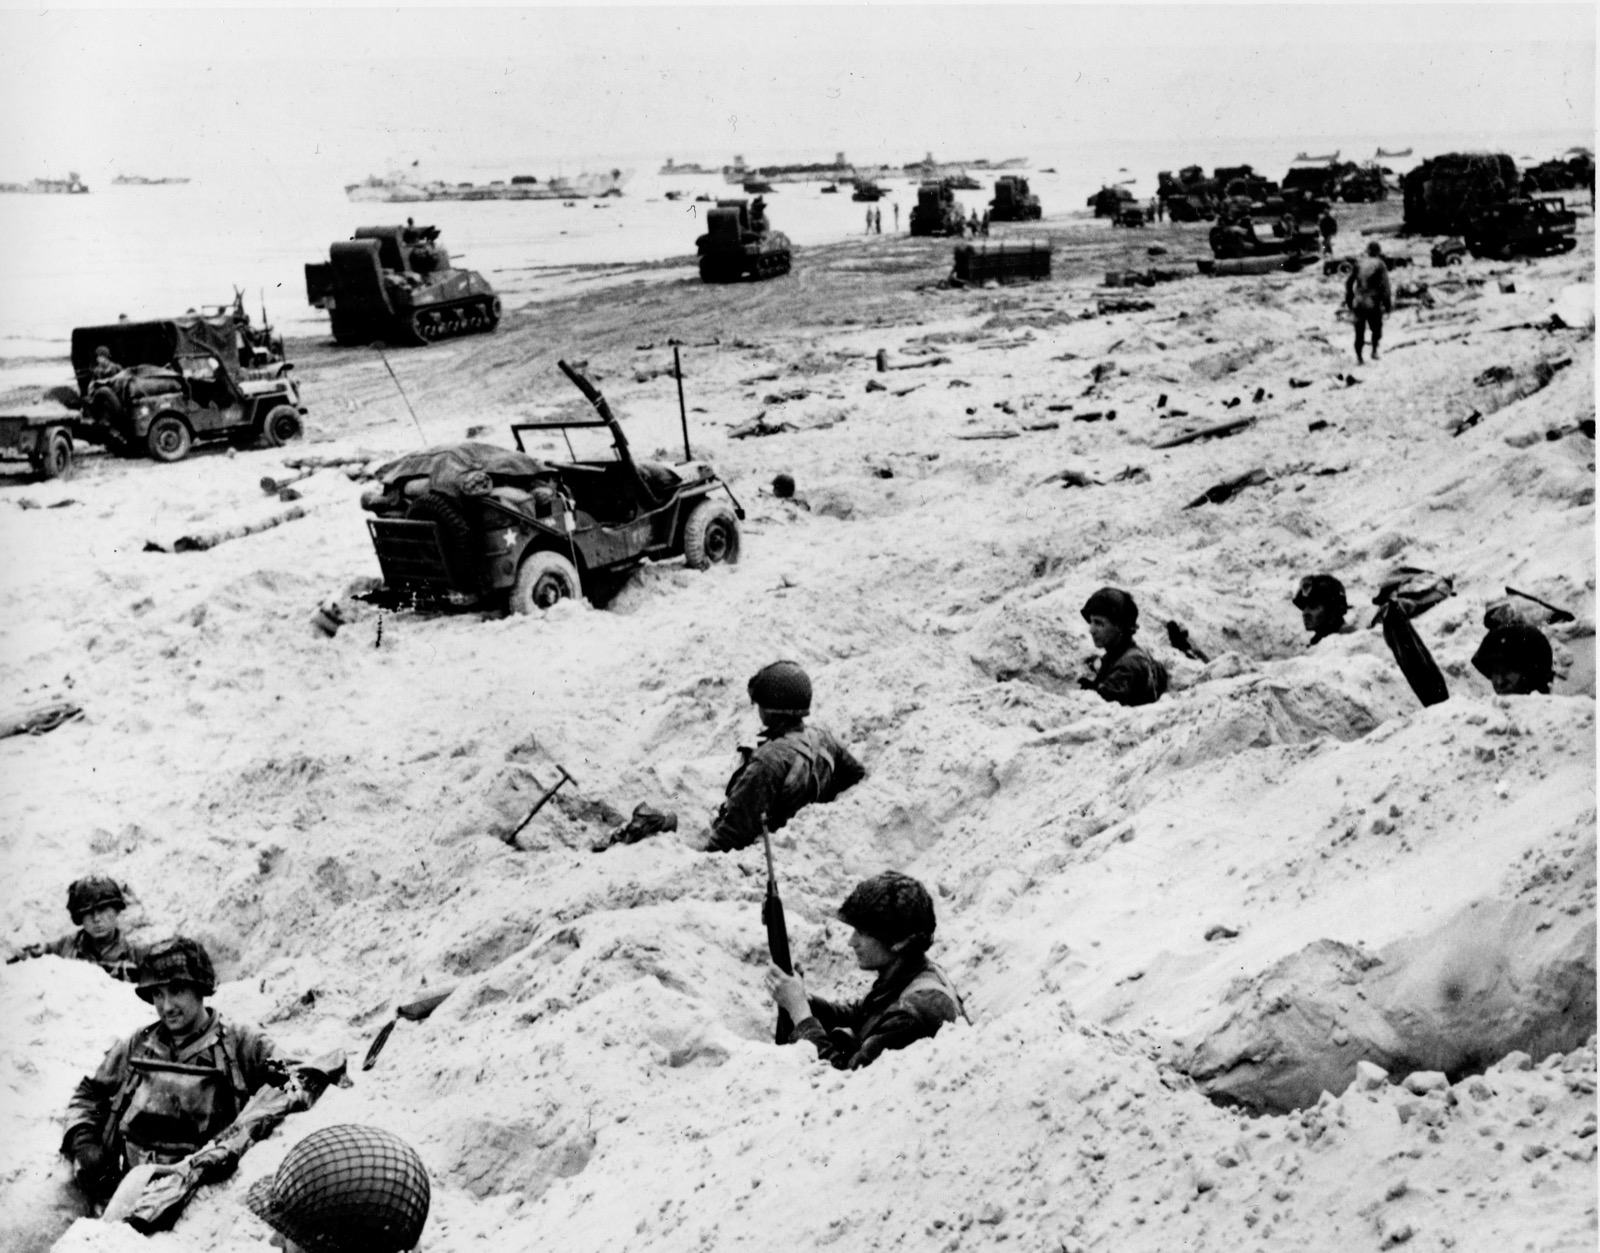 WWII D-DAY NORMANDY INVASION